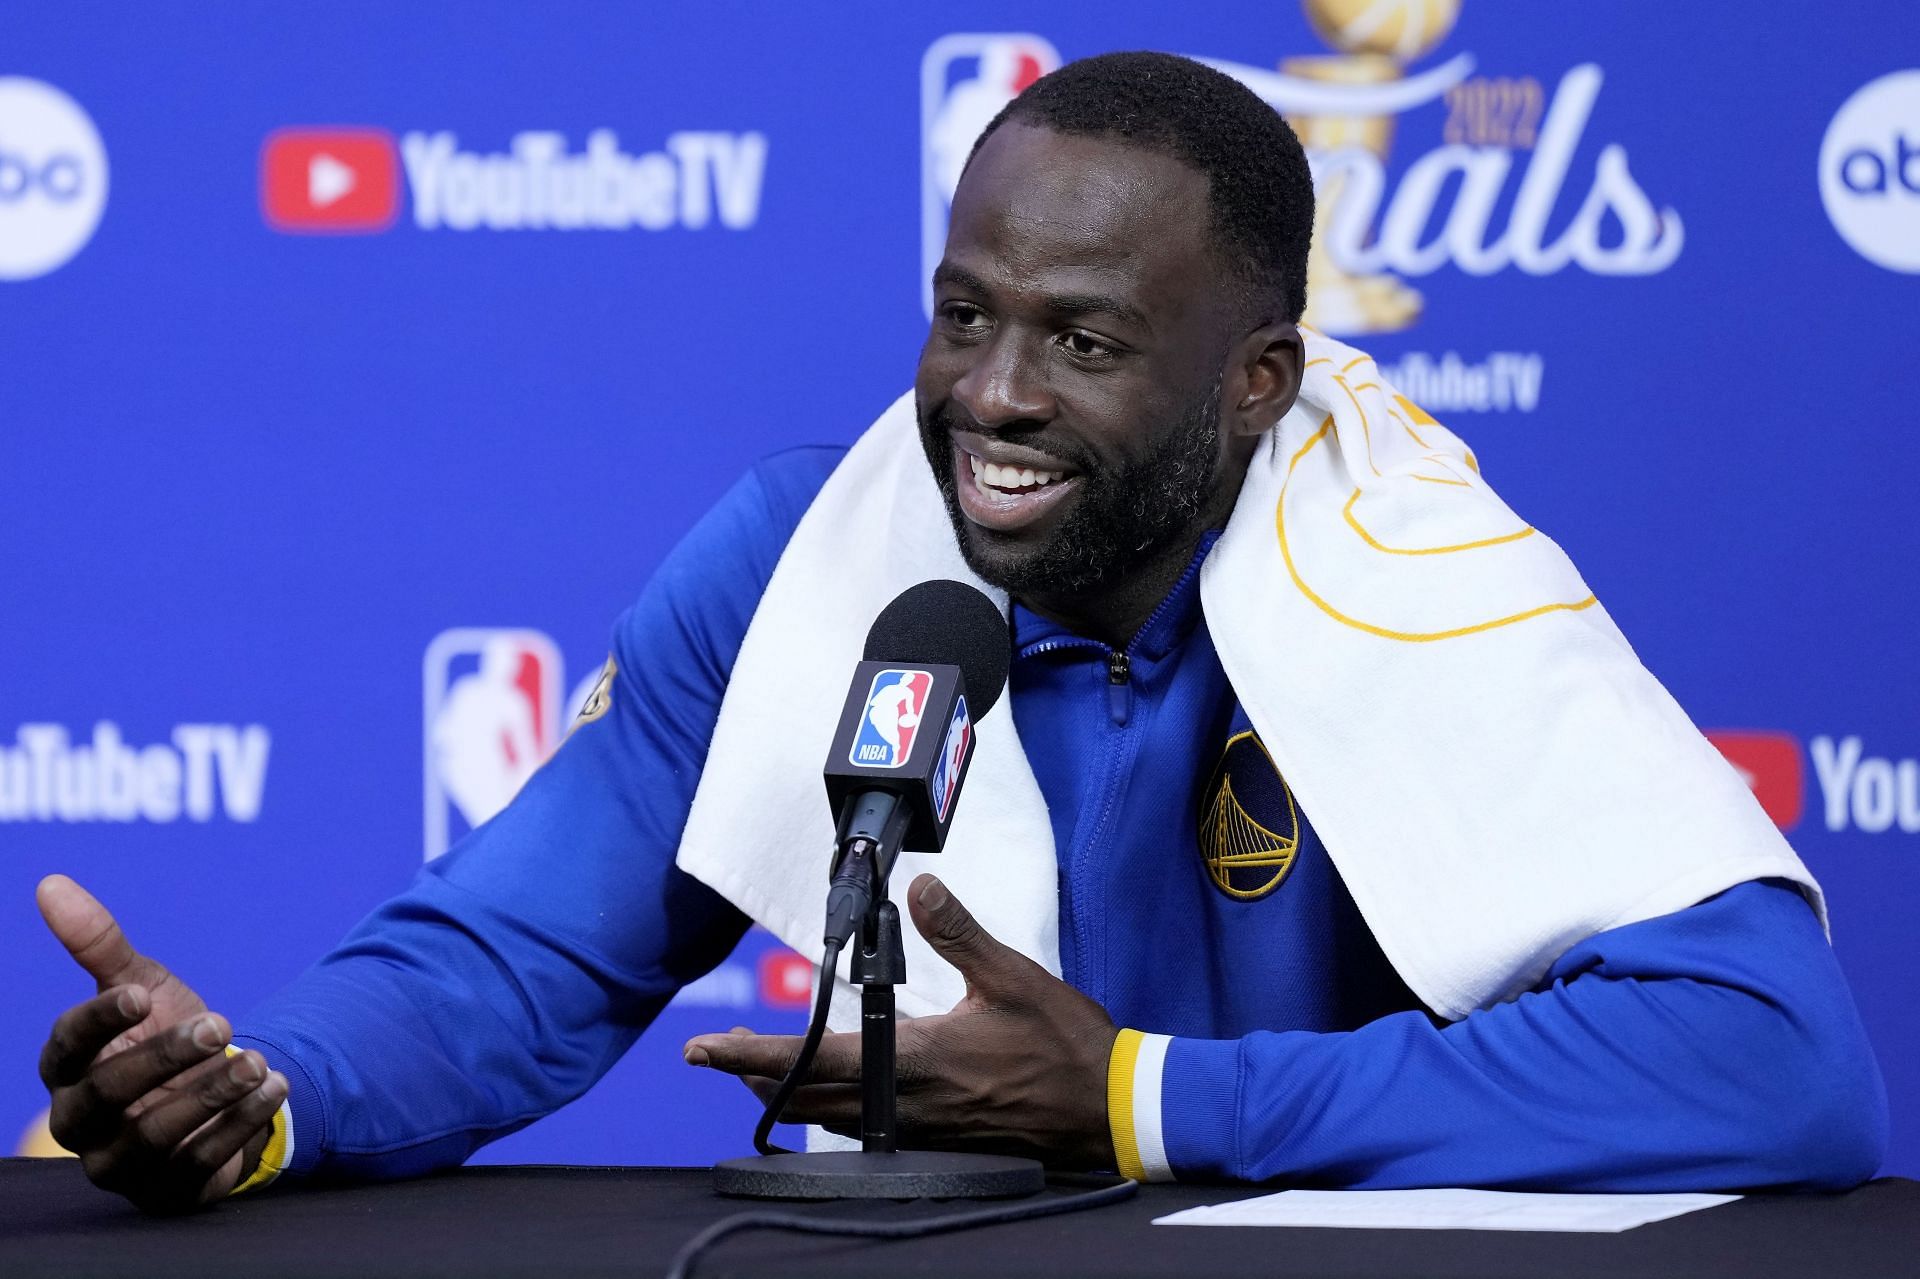 Draymond Green is on the receiving end of more comments from Skip Bayless.